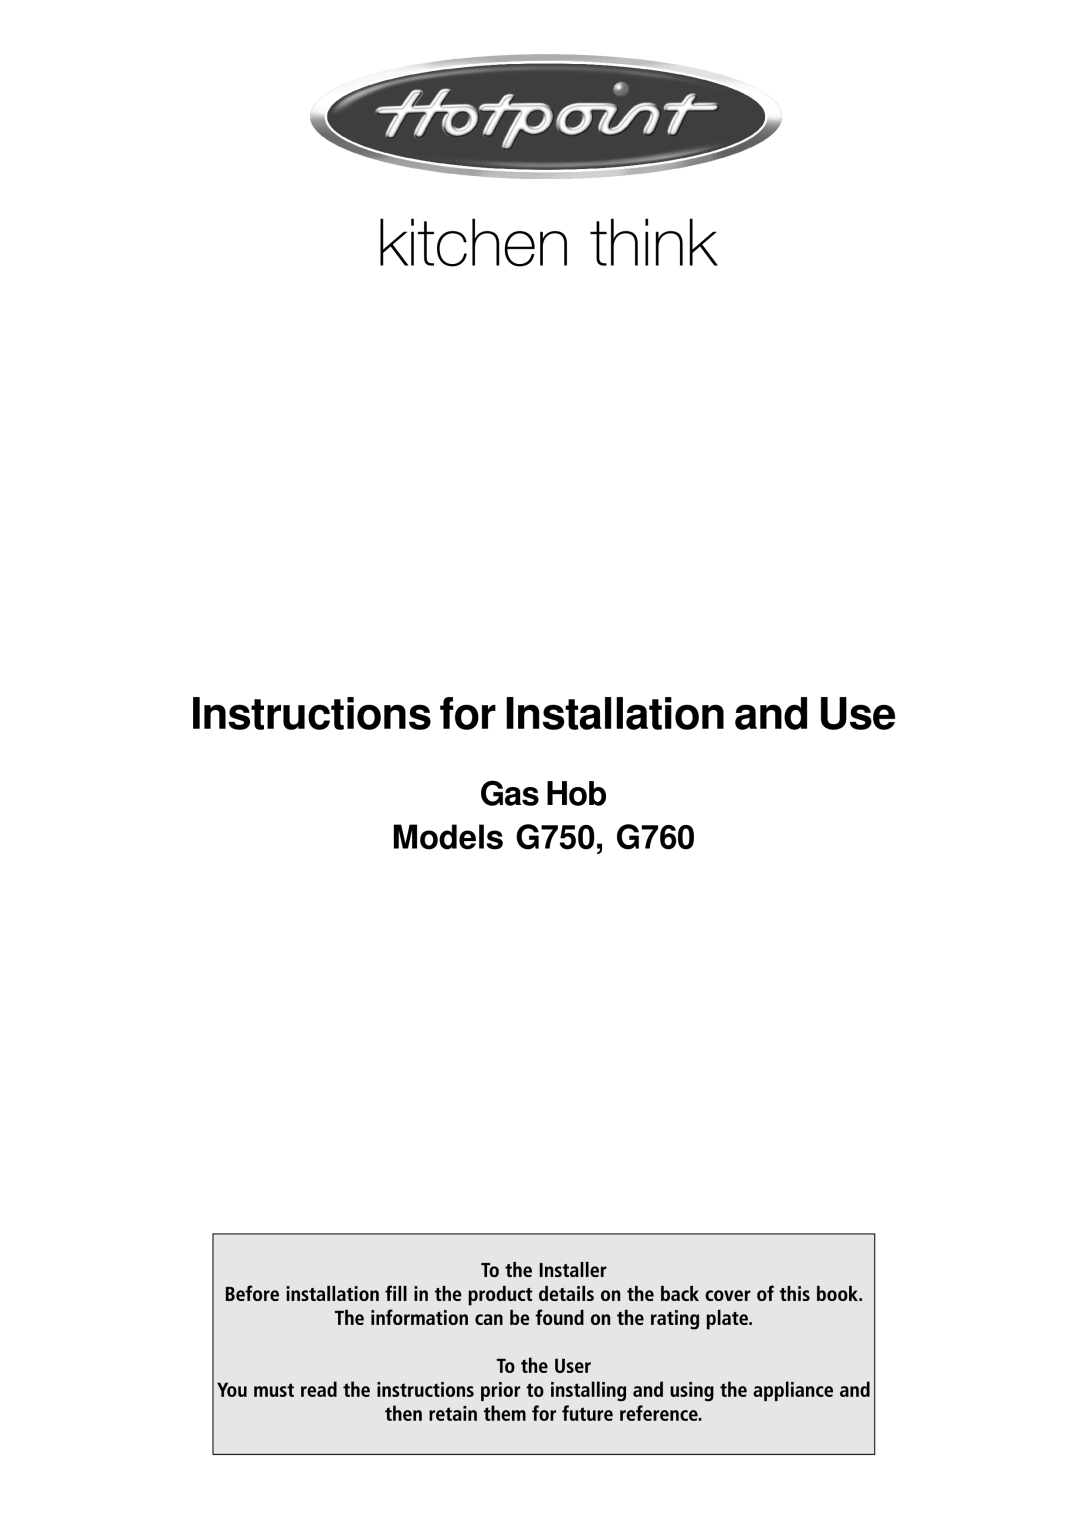 Hotpoint G760, G750 operating instructions Operating Instructions, Contents 